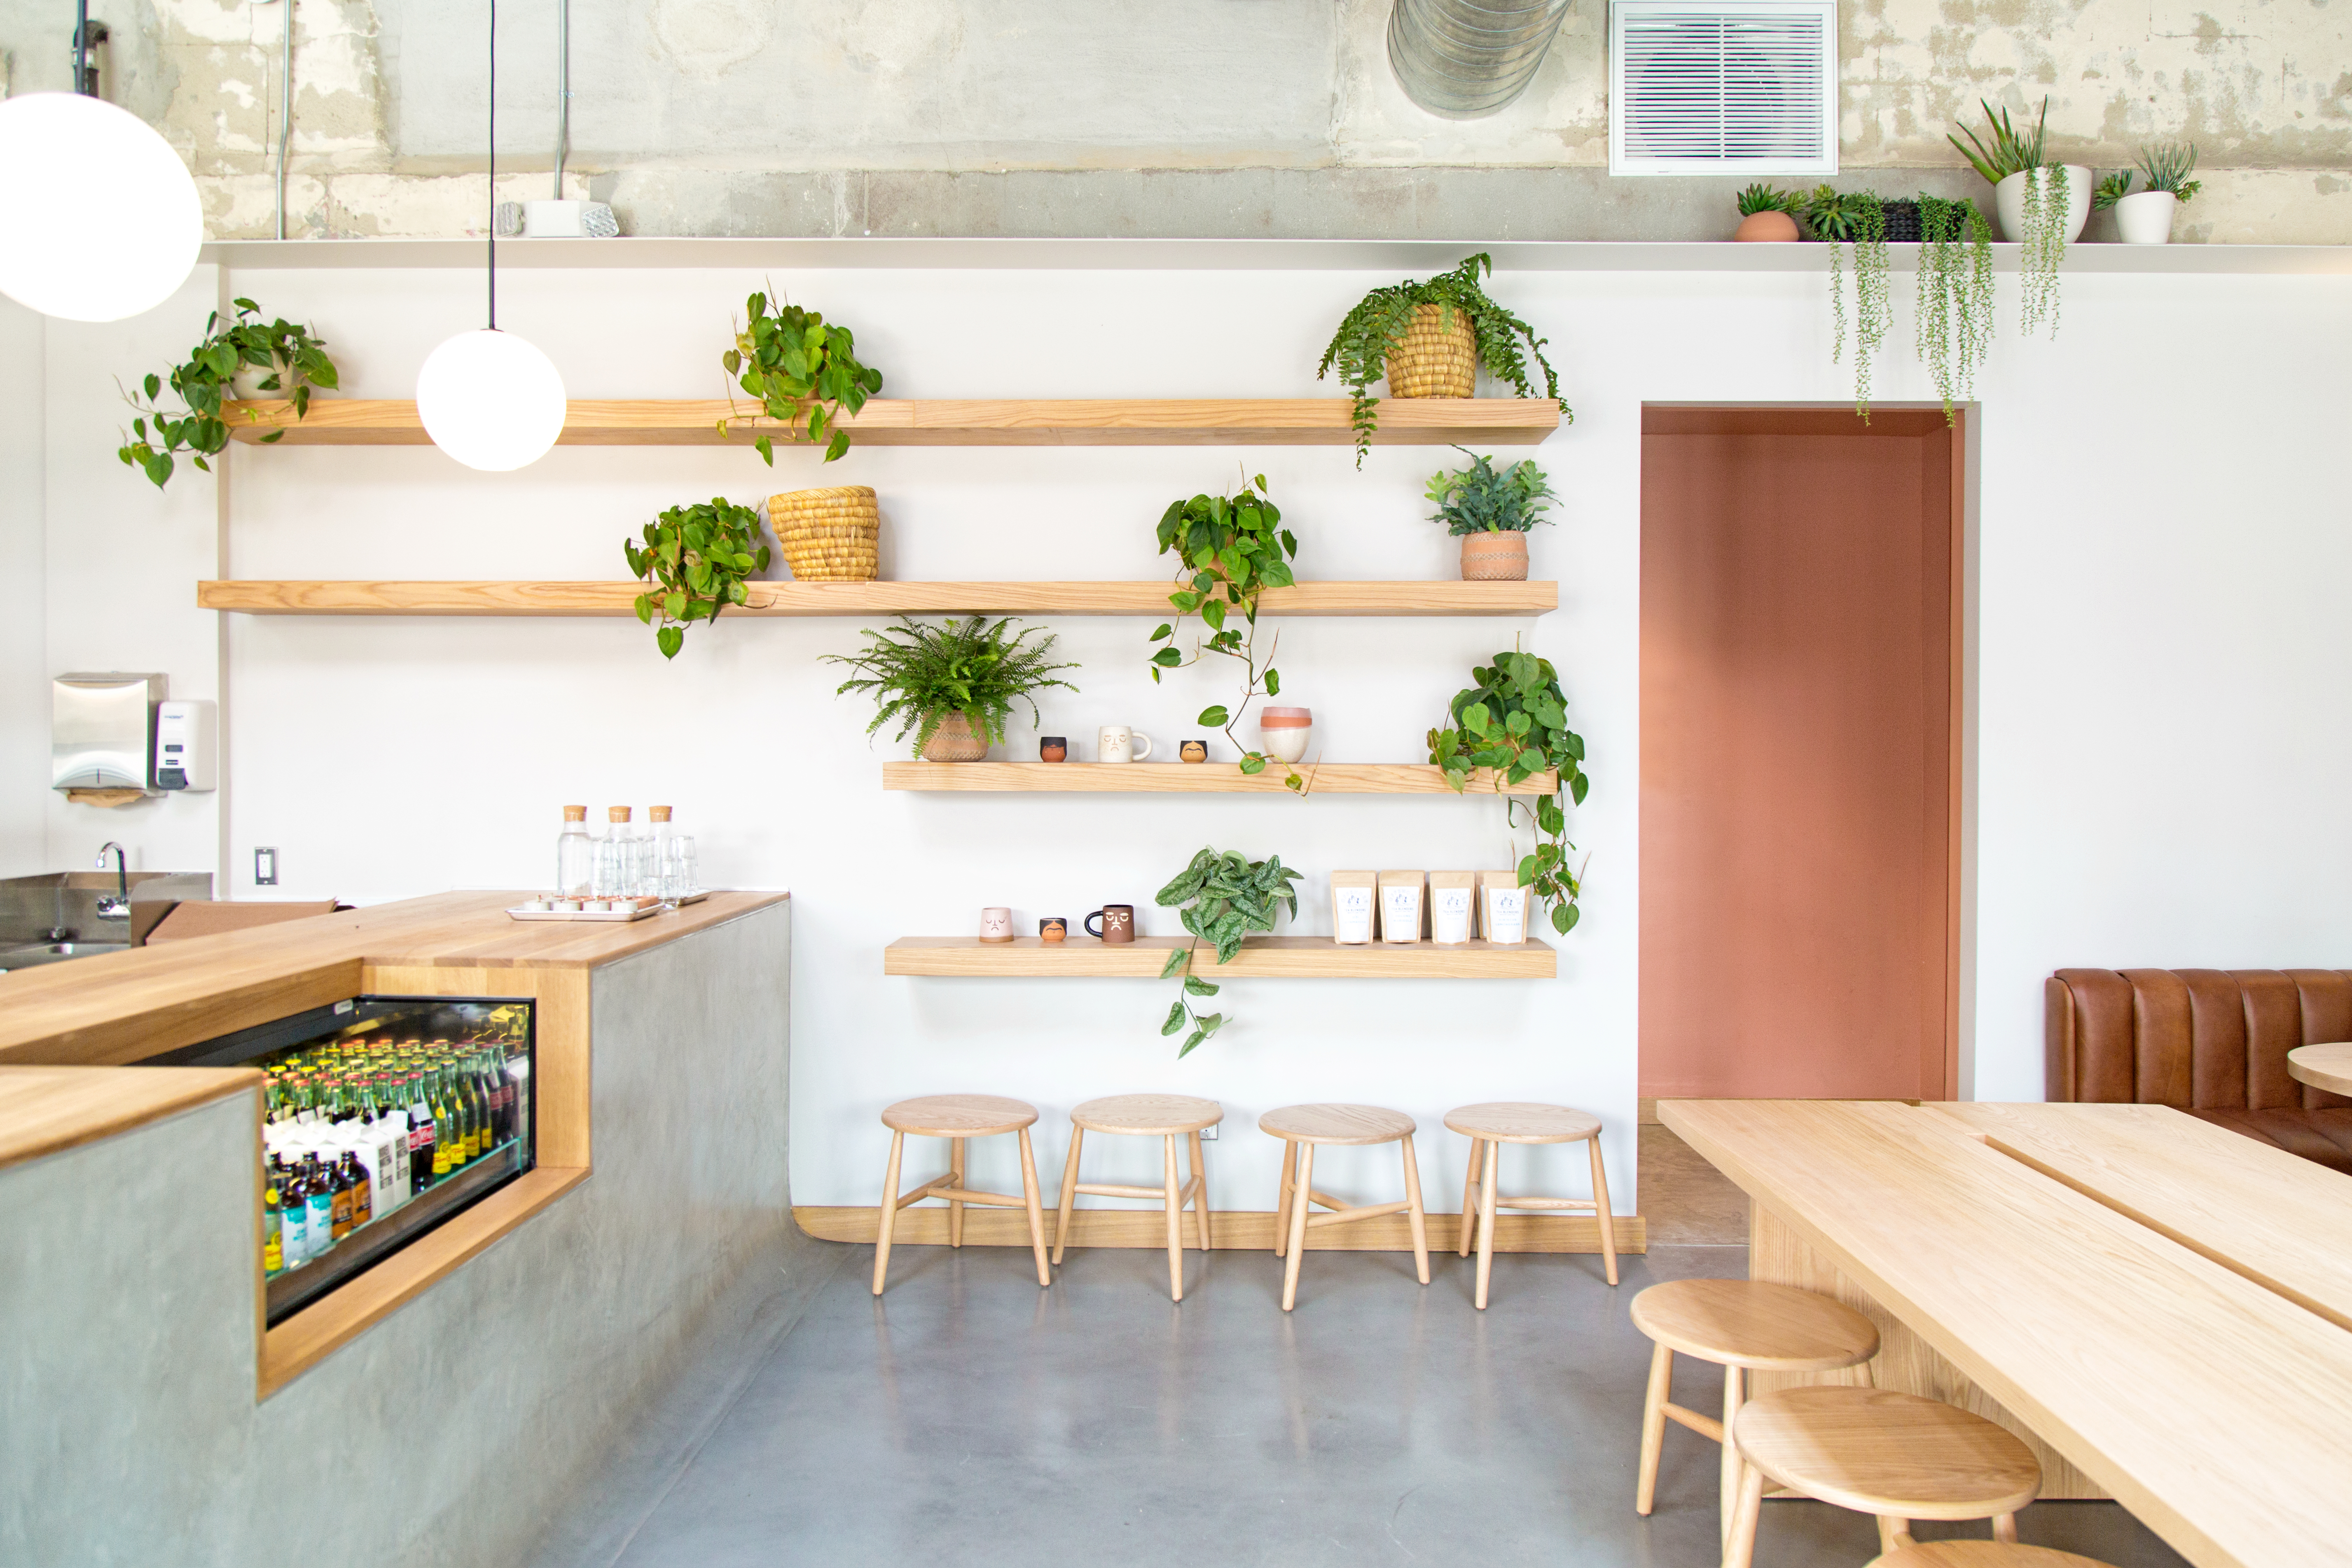 A bright room with wood tables, plants, and chairs at Highly Likely Cafe in Los Angeles, California.